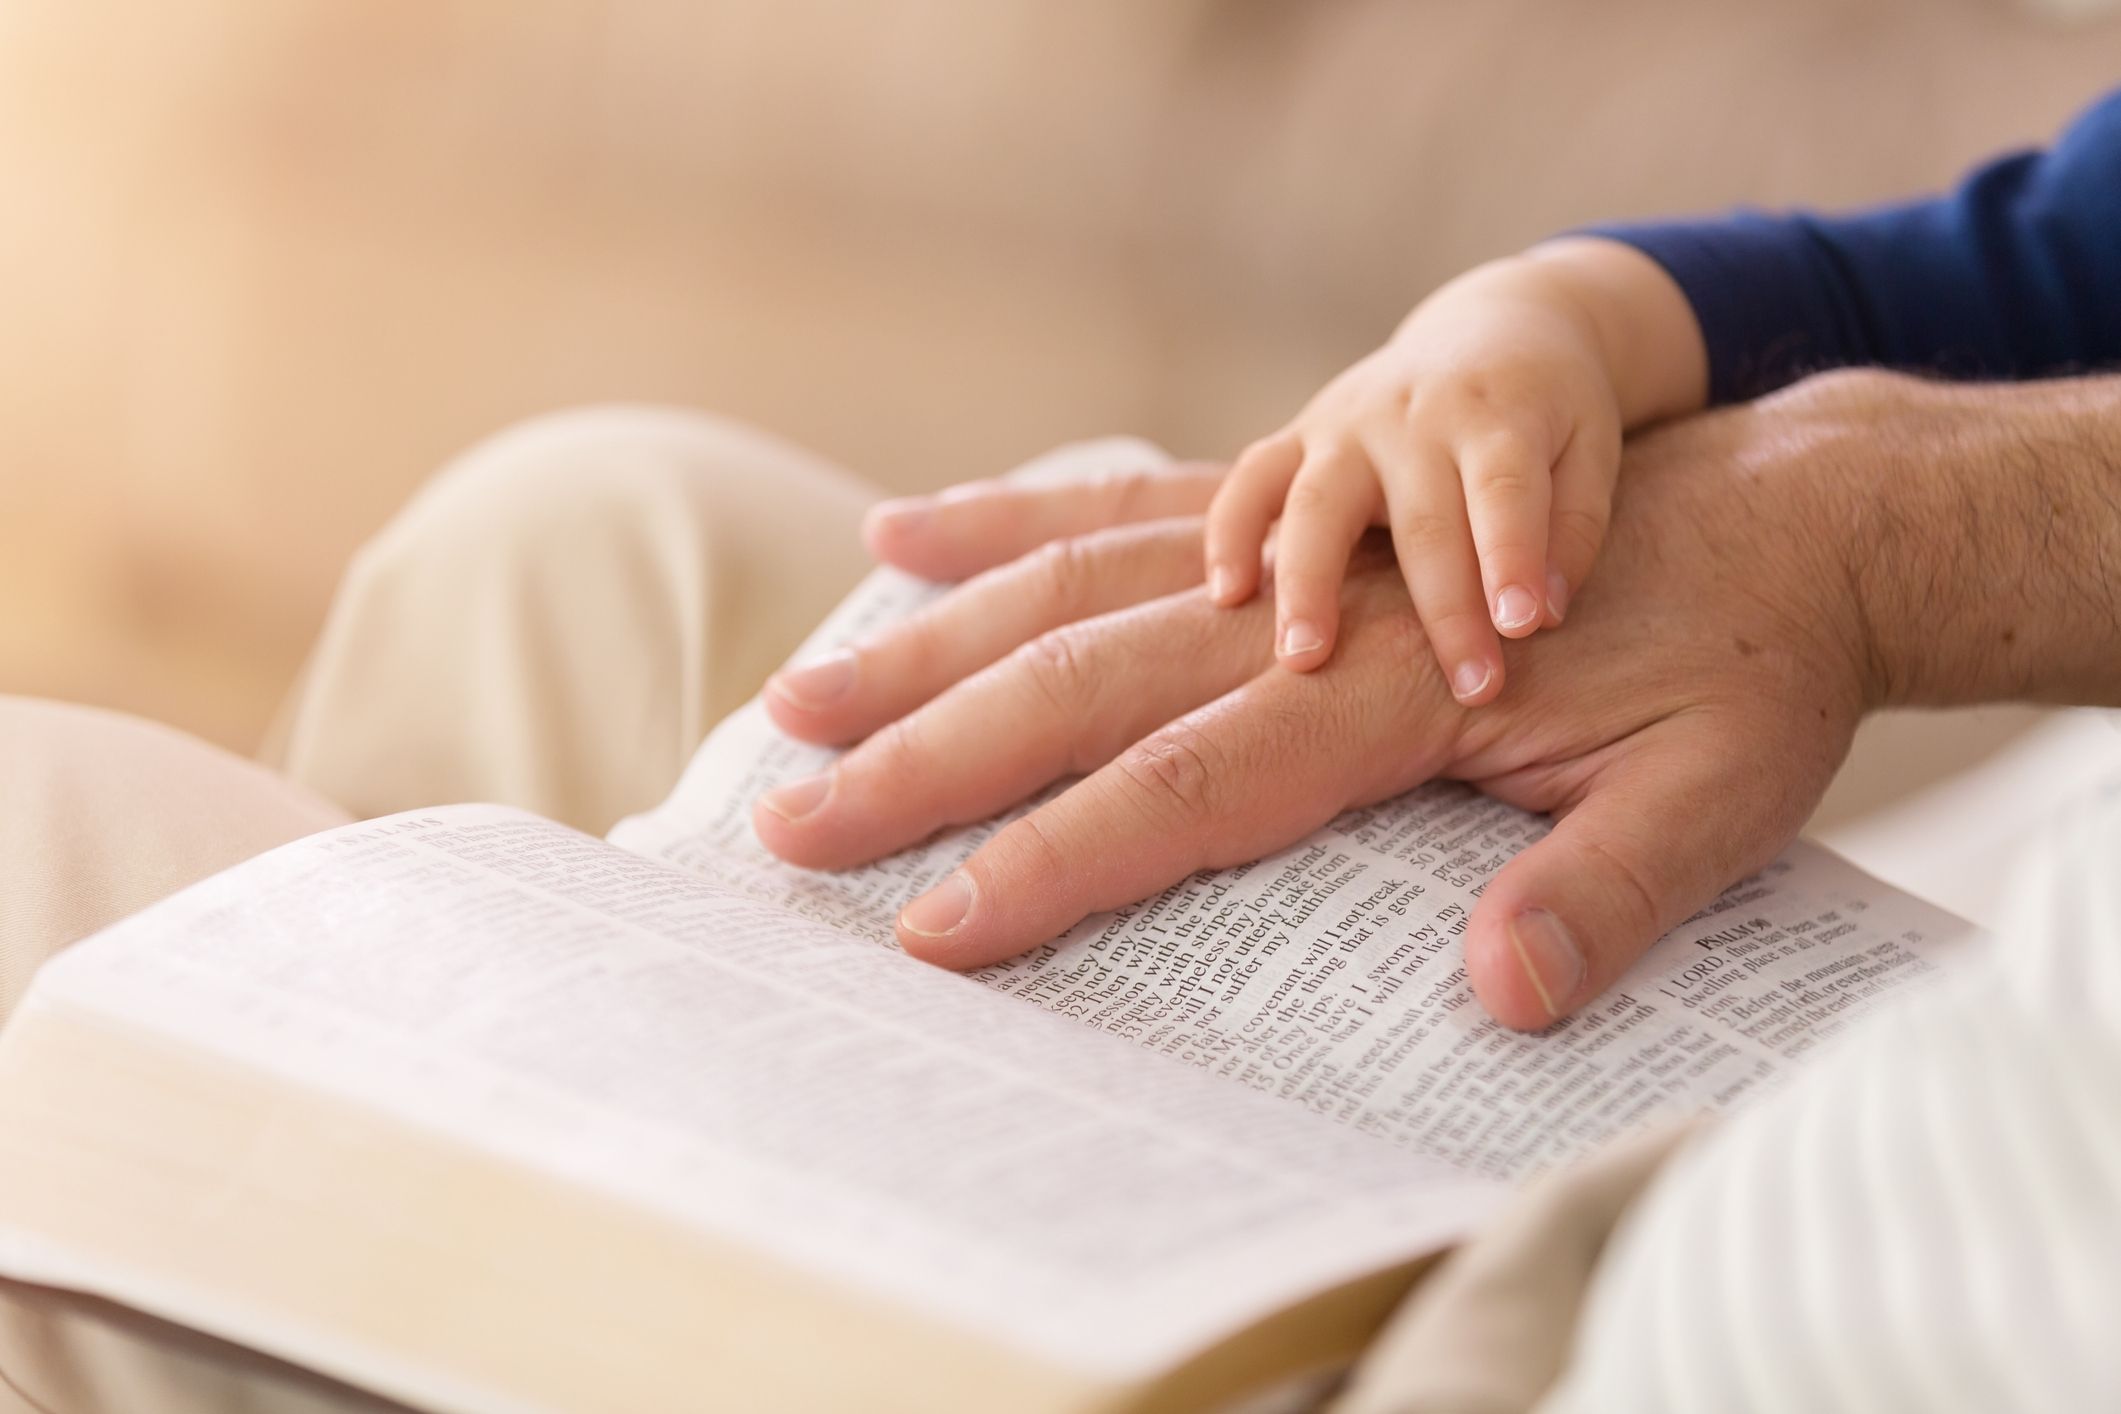 15 Important Bible Verses About Teaching Children